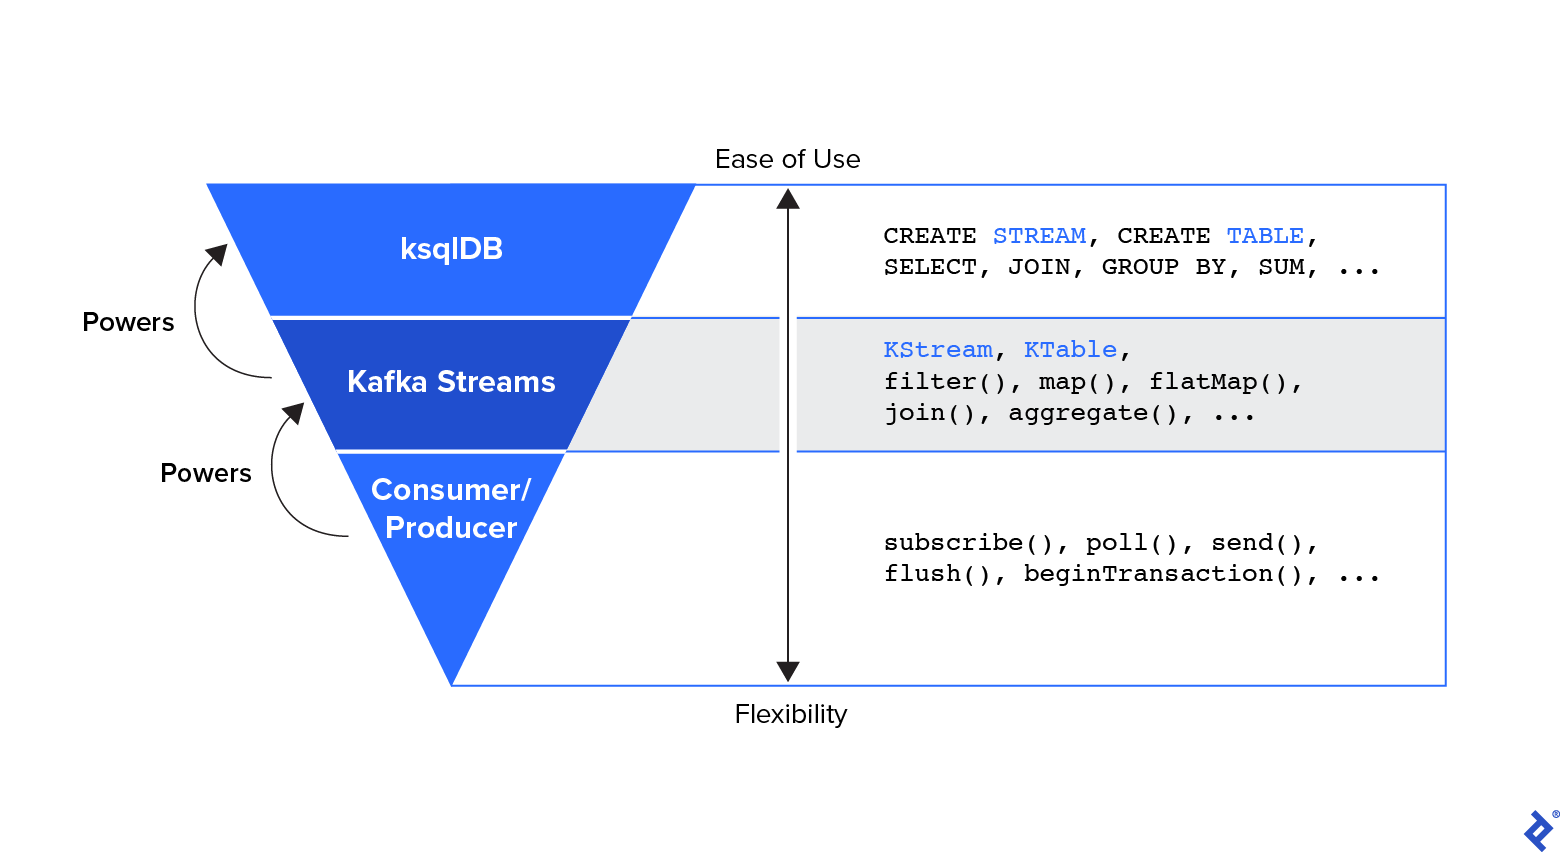 A diagram of an inverted pyramid in which ksqlDB is at the top, Kafka Streams is in the middle, and Consumer/Producer is at the bottom (the middle tier of the pyramid). The Kafka Streams tier powers the ksqlDB tier above it. The Consumer and Producer tier powers the Kafka Streams tier. A two-way arrow to the pyramidâs right delineates a spectrum from Ease of Use at the top to Flexibility at the bottom. On the right are examples of each tier of the pyramid. For ksqlDB: Create Stream, Create Table, Select, Join, Group By, or Sum, etc. For Kafka Streams: KStream, KTable, filter(), map(), flatMap(), join(), or aggregate(), etc. For Consumer/Producer: subscribe(), poll(), send(), flush(), or beginTransaction(), etc. To show their correspondence, Stream and Table from ksqlDB and KStream and KTable from Kafka Streams are highlighted in blue.